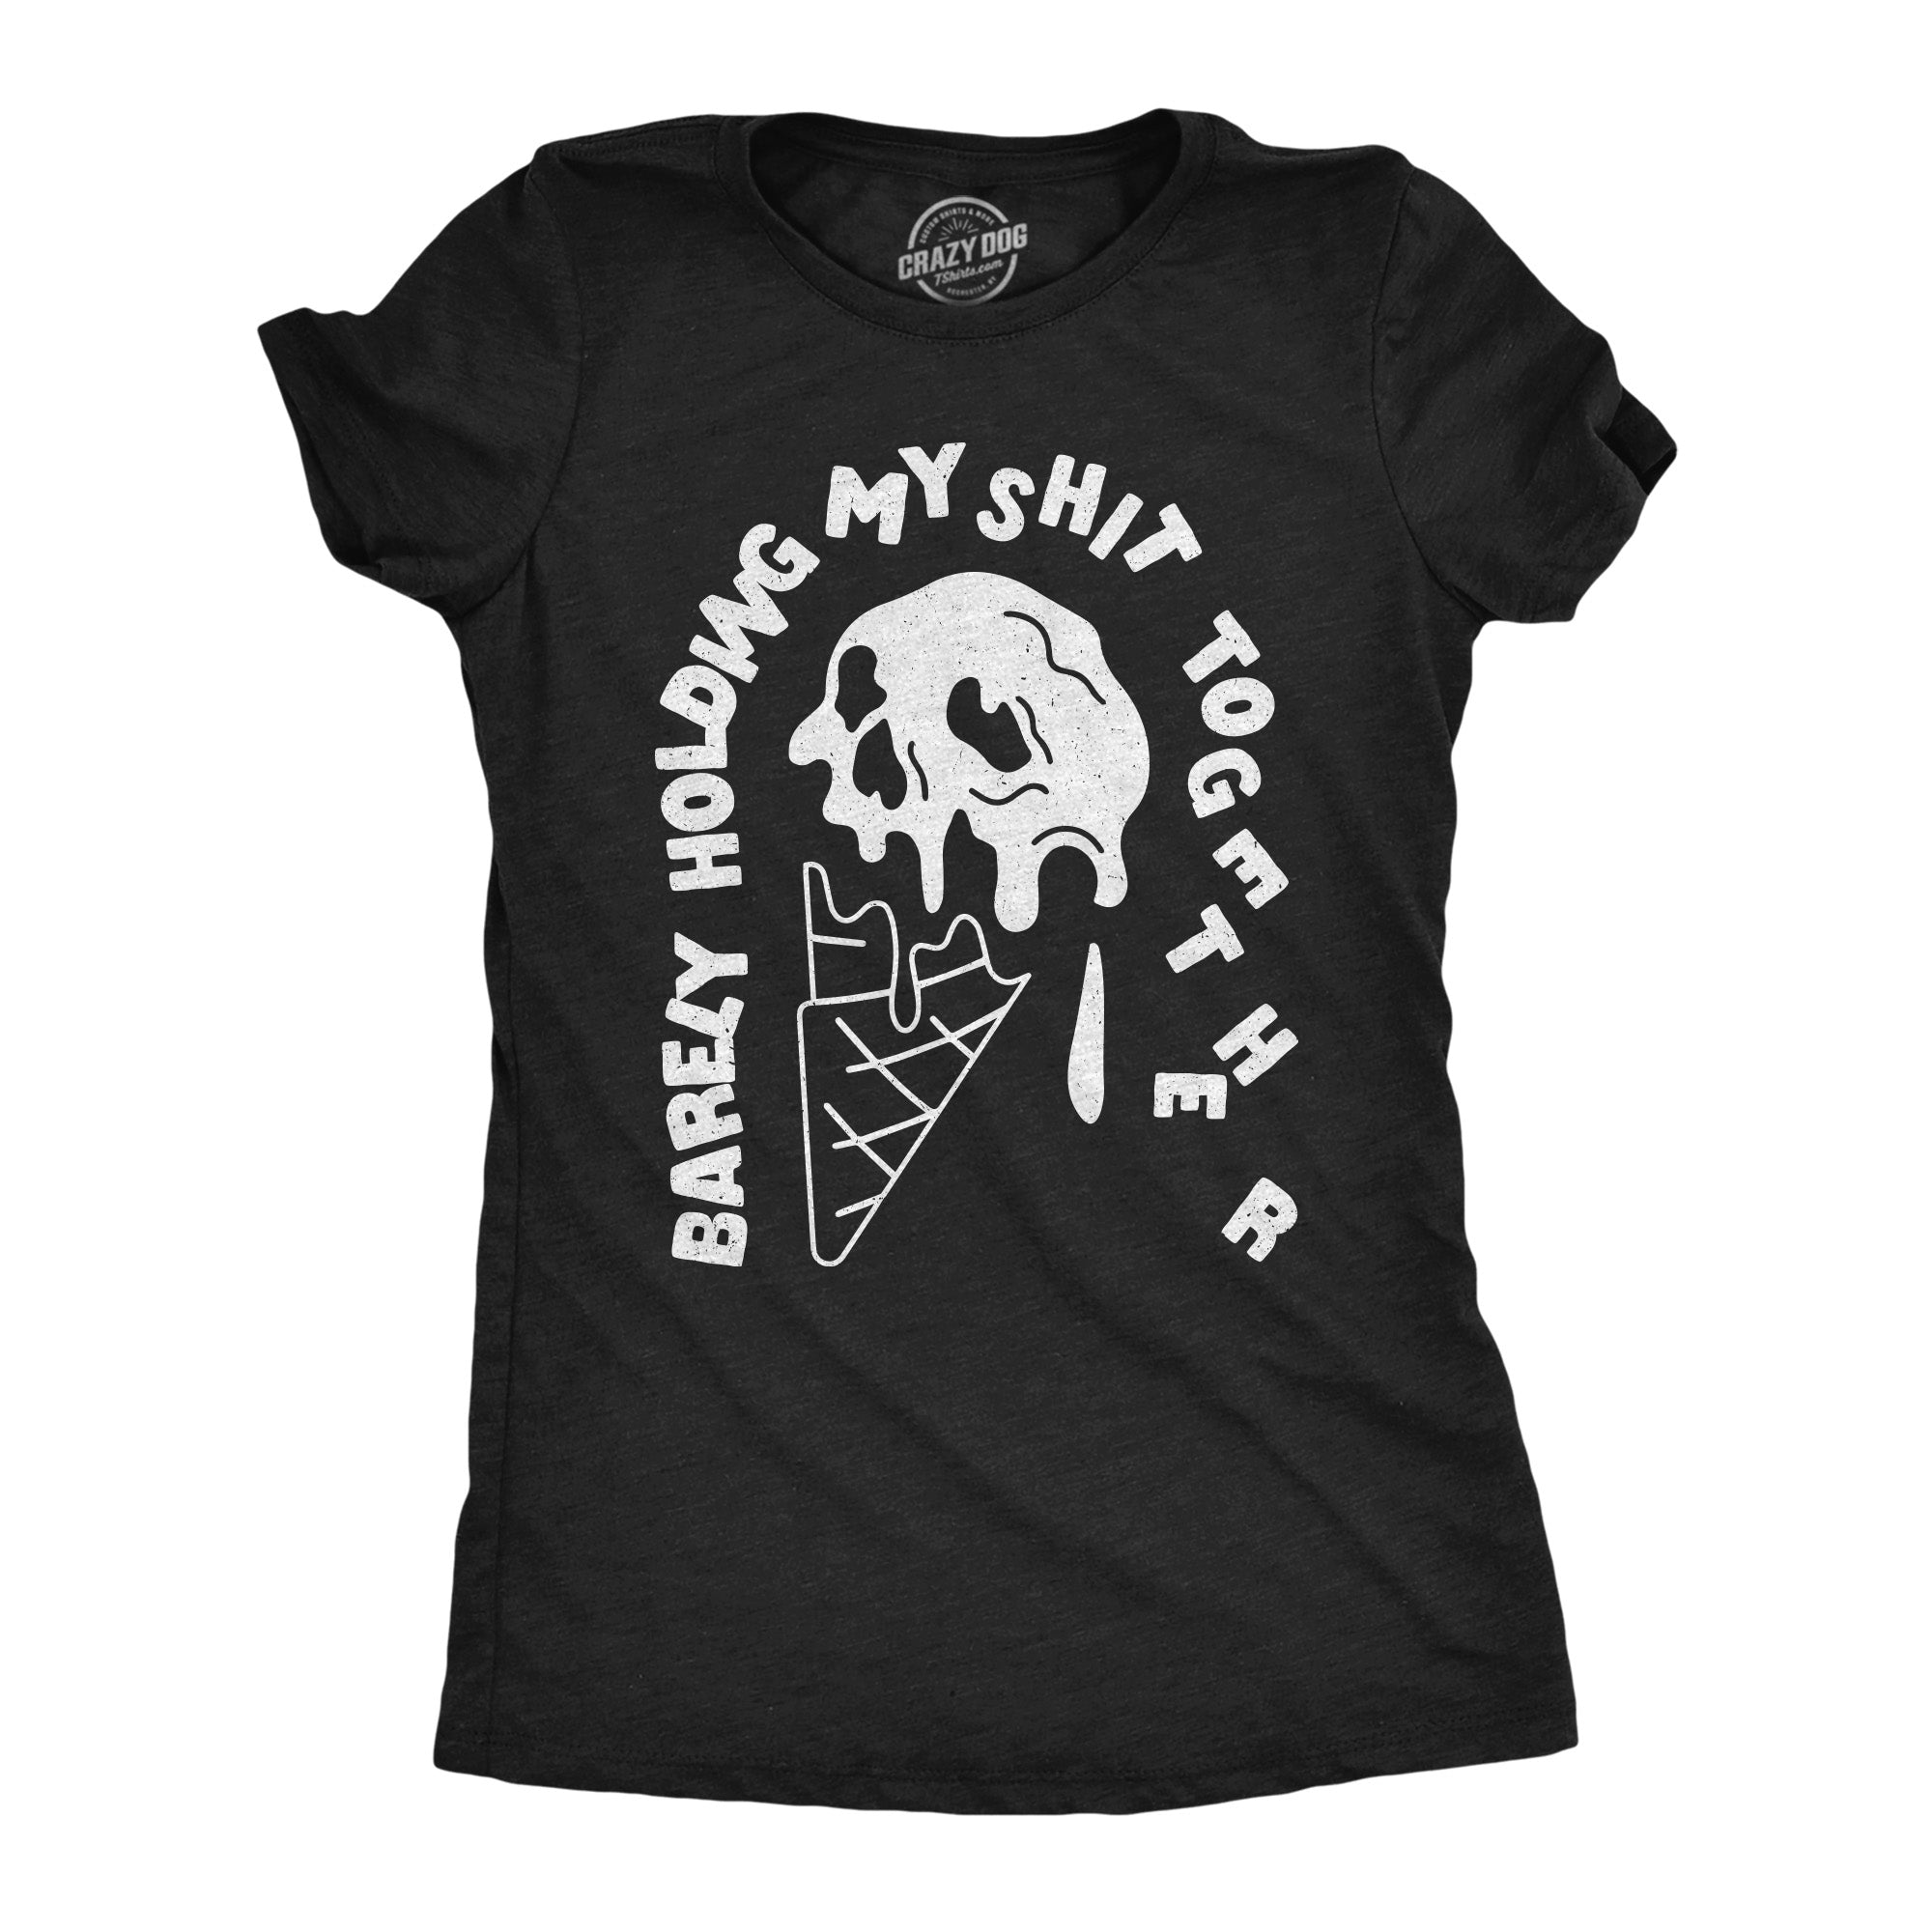 Funny Heather Black - Barely Holding My Shit Together Barely Holding My Shit Together Womens T Shirt Nerdy sarcastic Tee